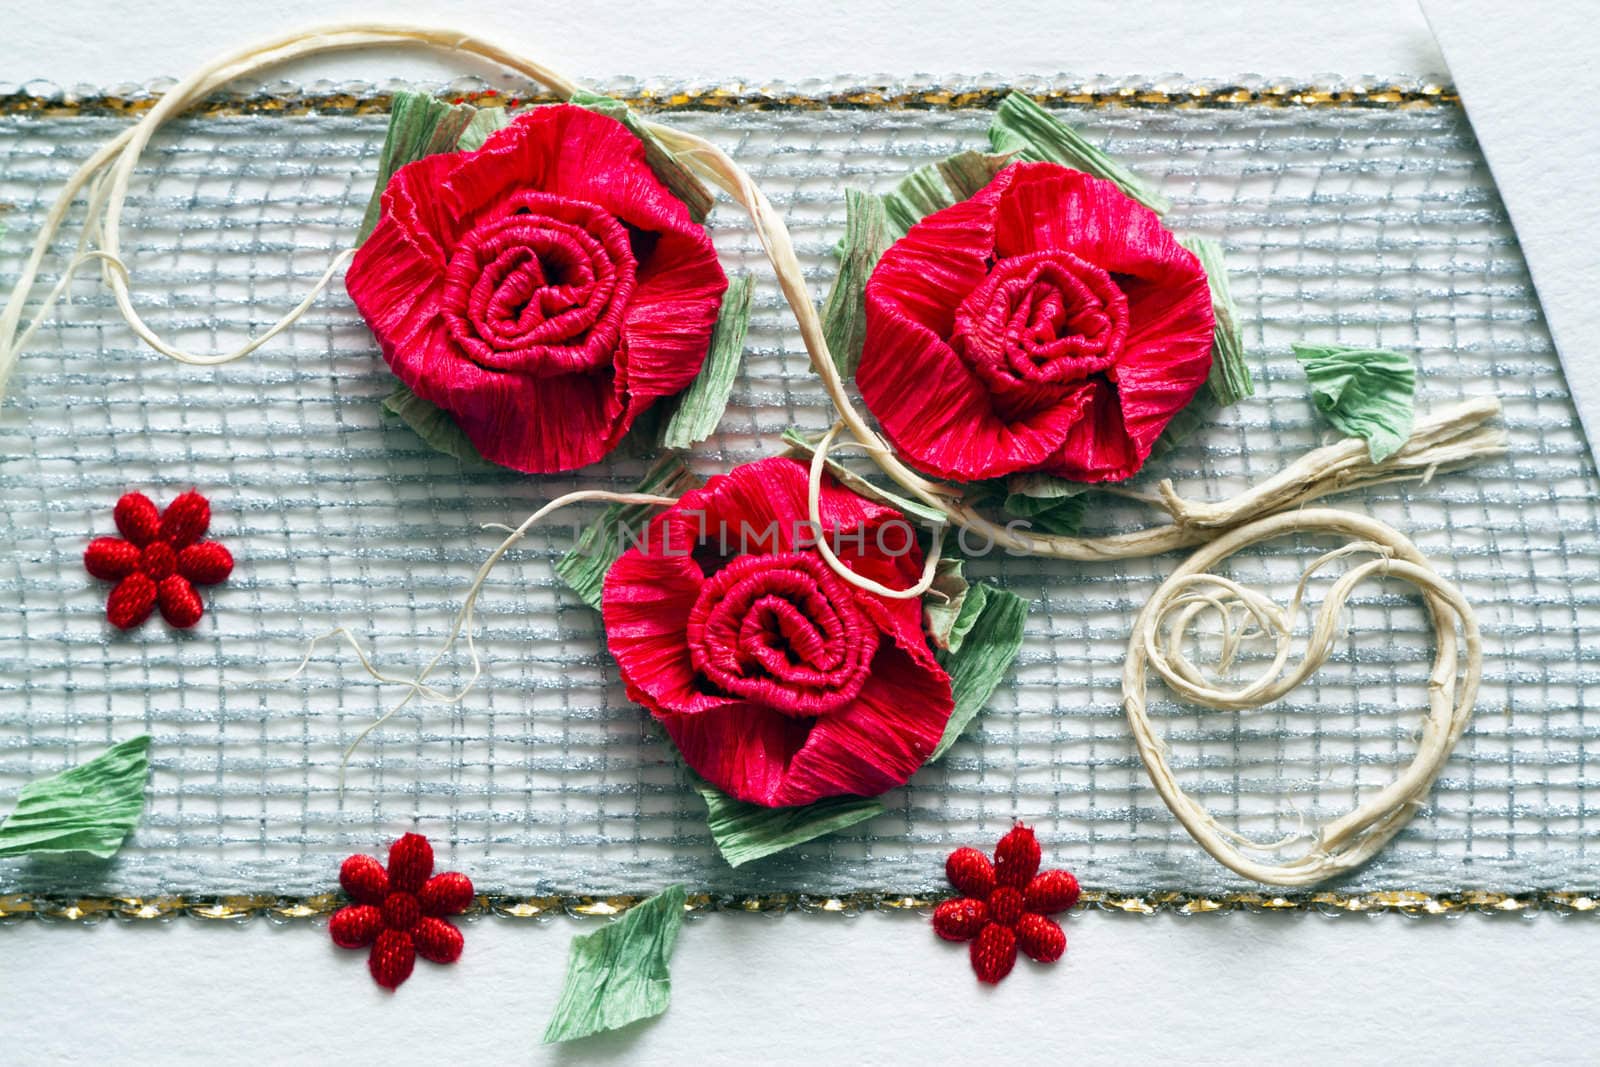 Wedding invitation ornament with red roses
